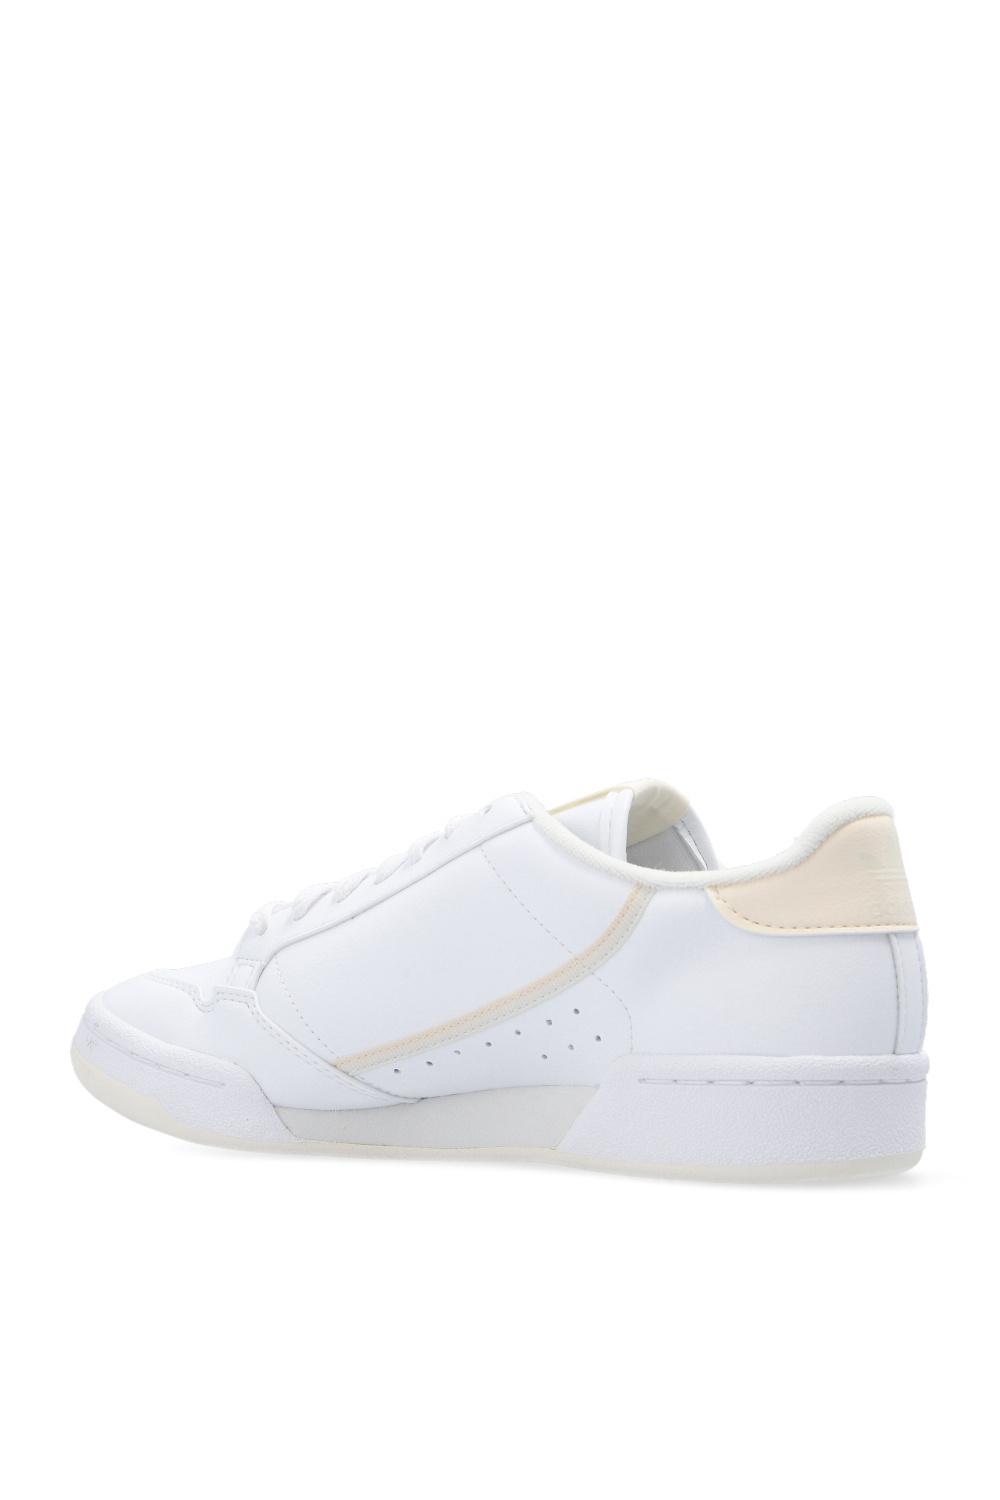 adidas Originals Leather 'continental 80 Vegan' Sneakers in White | Lyst